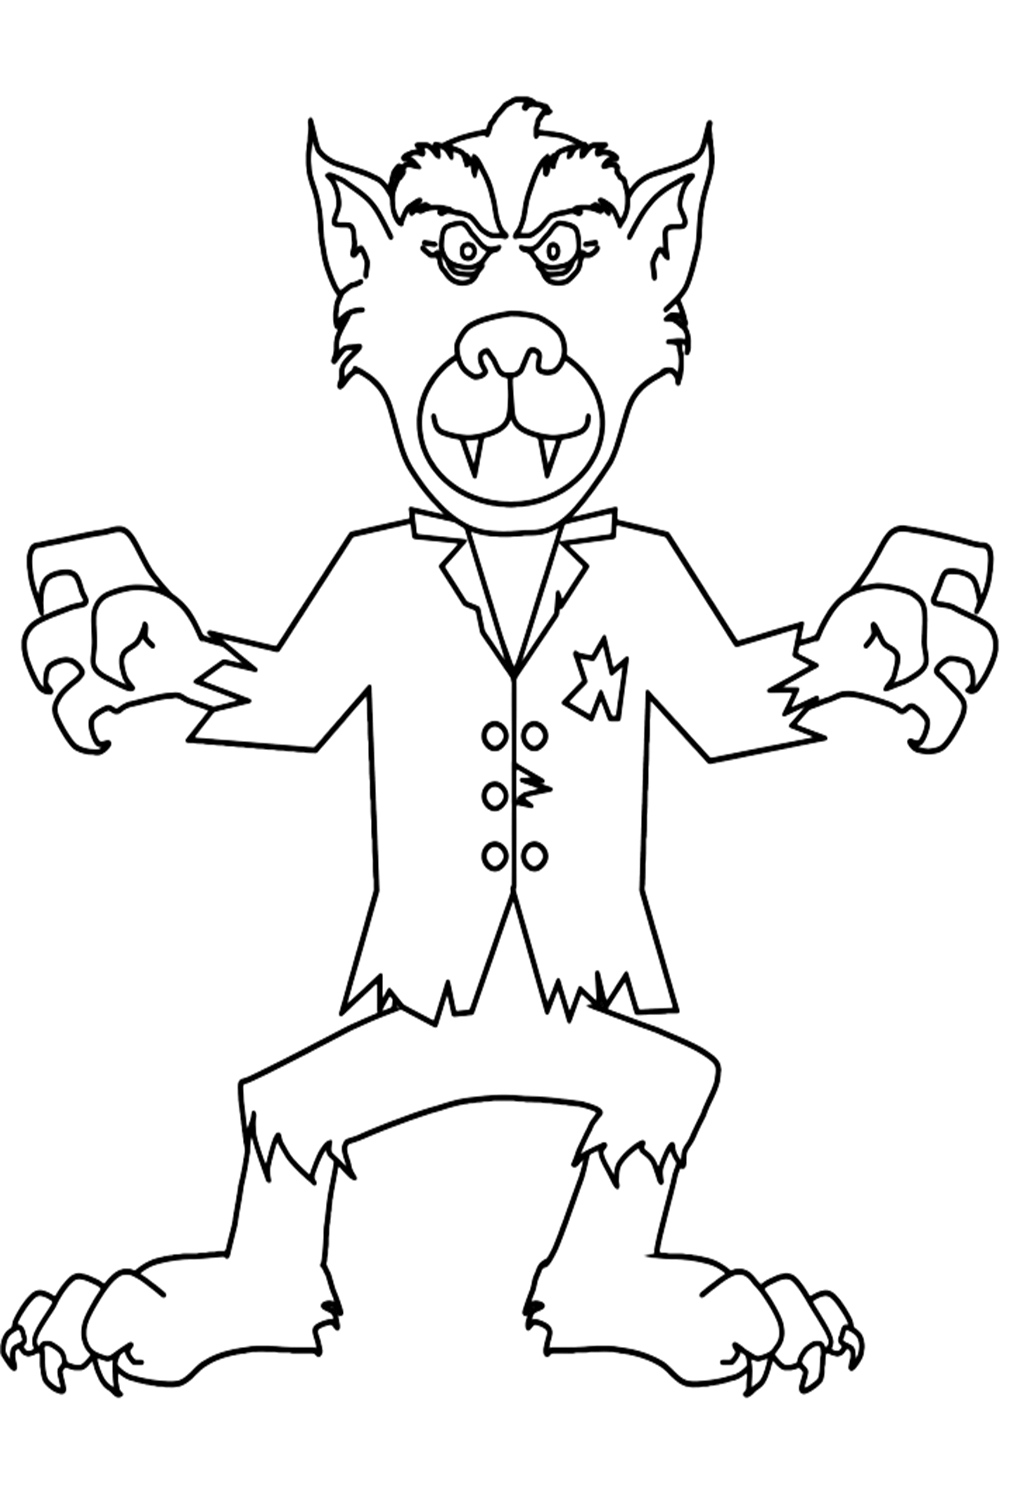 Werewolf to Print Coloring Pages